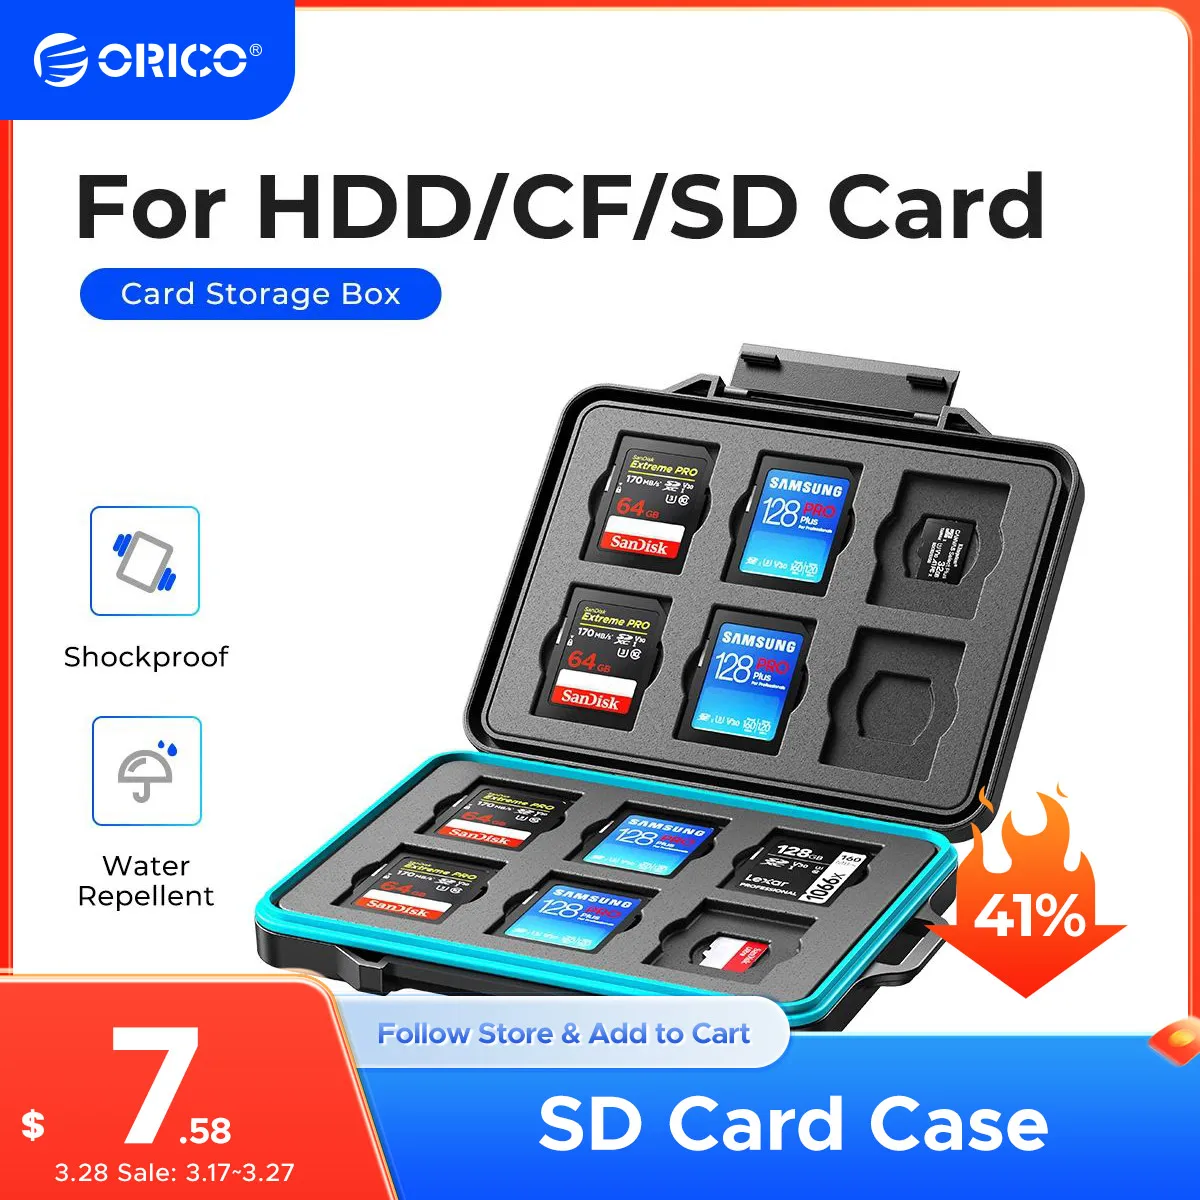 ORICO 12 Slots SD Card 12 Slots TF Card Waterproof Memory SD Card Case for Computer Camera Cards Storage Organizer Anti-static jjc 24 slots memory card case holder wallet for 8 sd sdxc sdhc 16 msd micro sd tf card box storage organizer with card reader